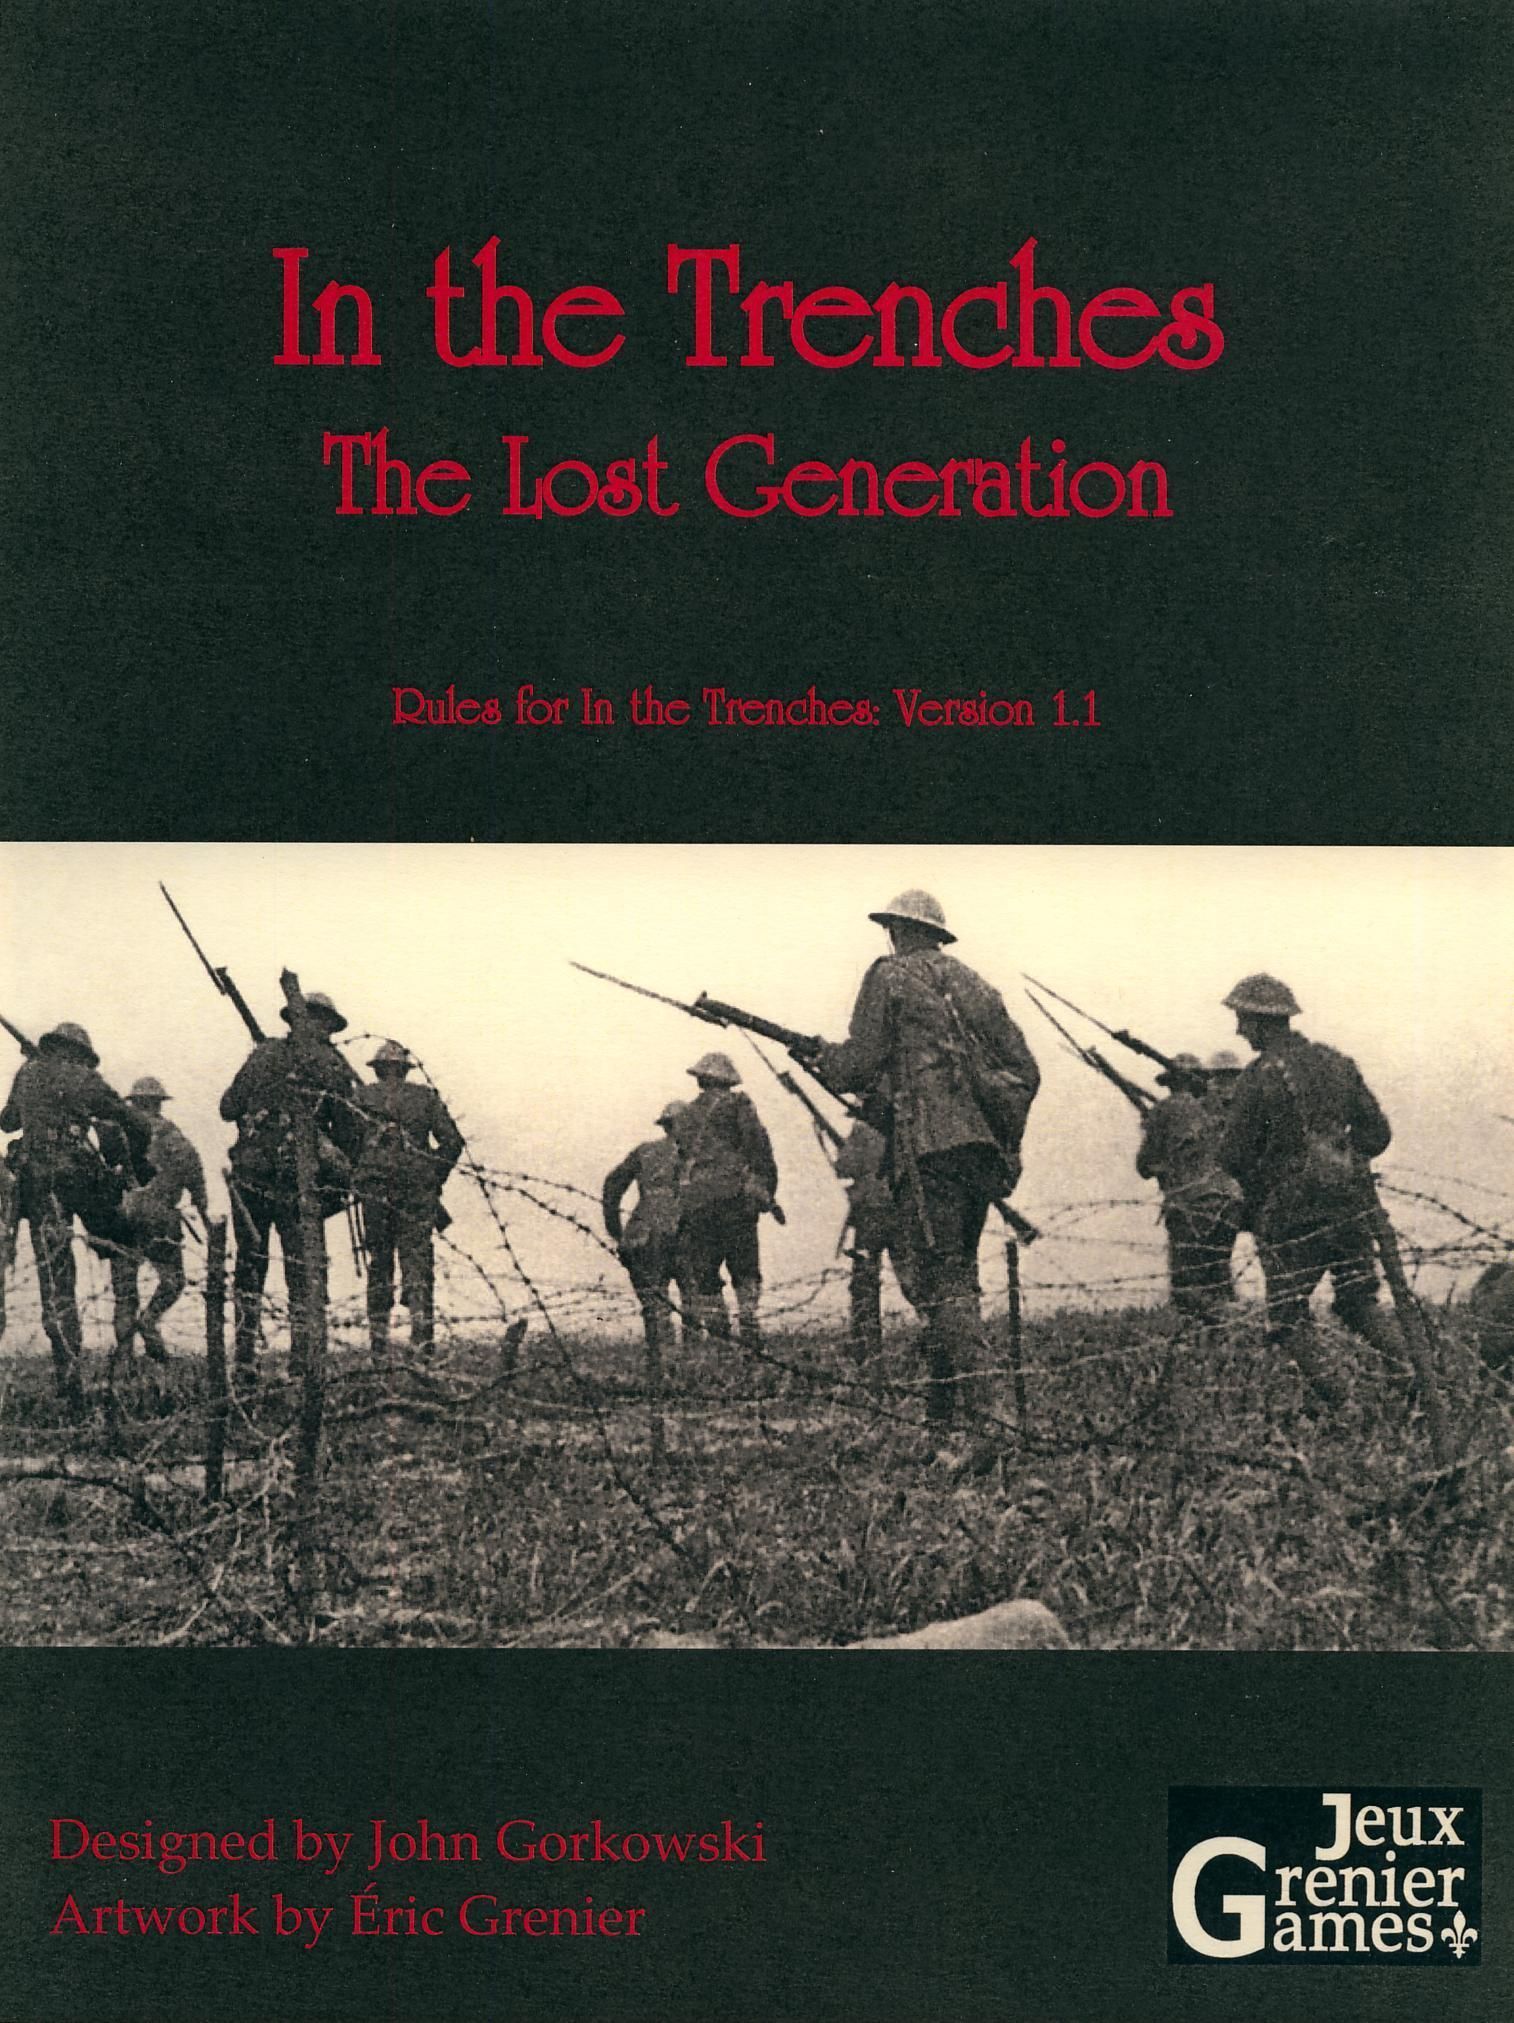 In the Trenches: The Lost Generation